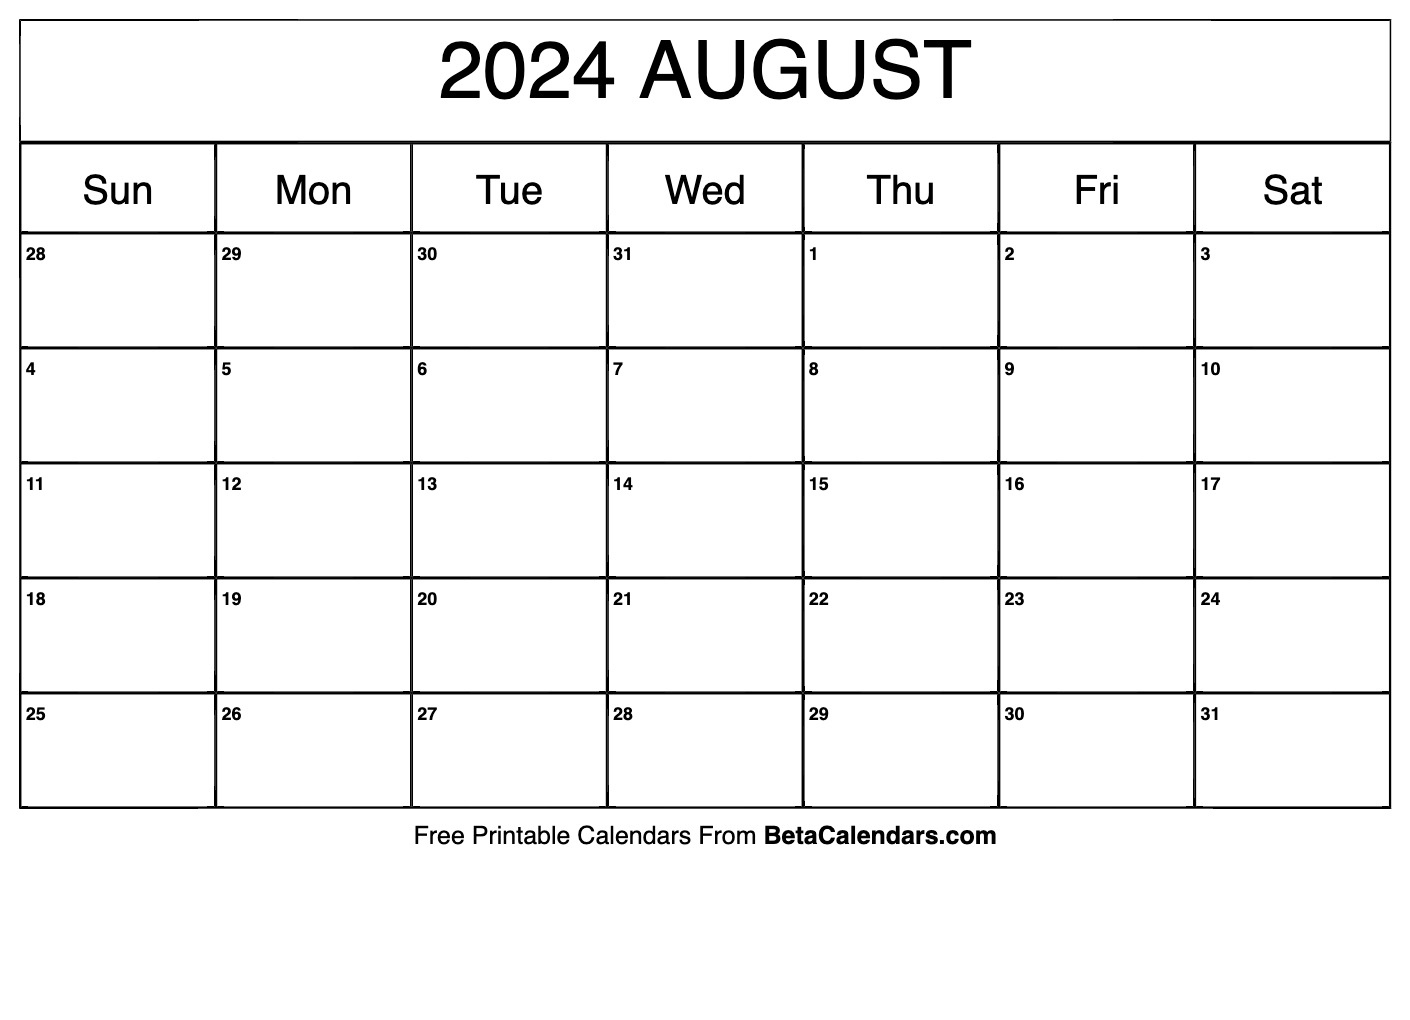 Free Printable August 2024 Calendar with Free Printable Calendar August 2024 To August 2024